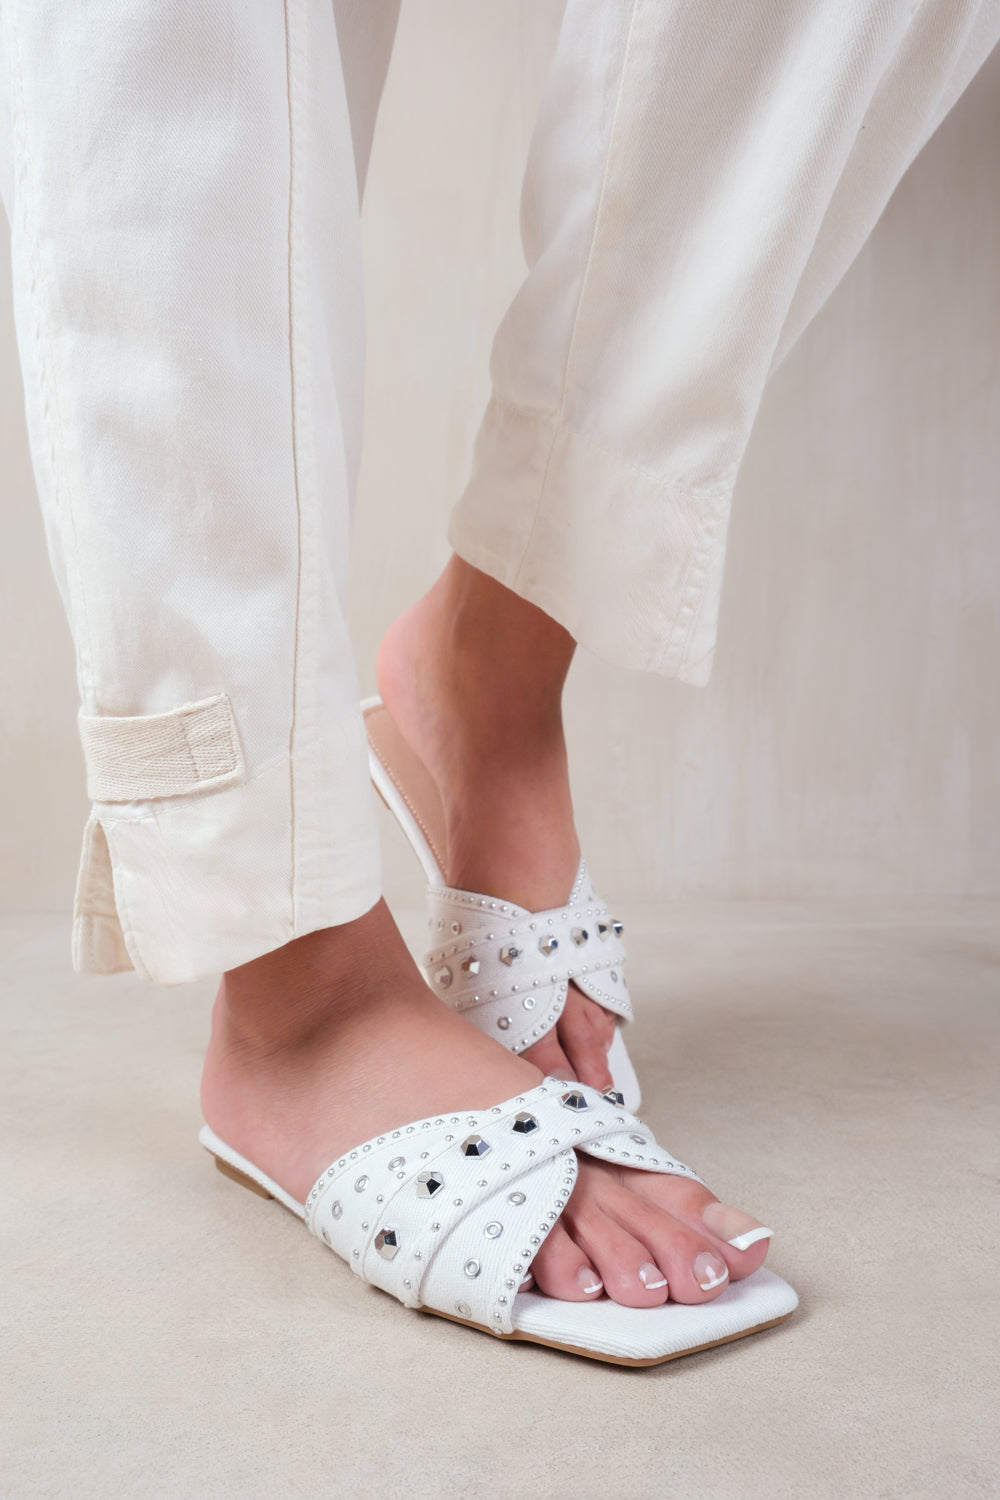 SATURN DOUBLE CROSS OVER STRAP FLAT SANDALS WITH STUD DETAILS IN WHITE FAUX LEATHER